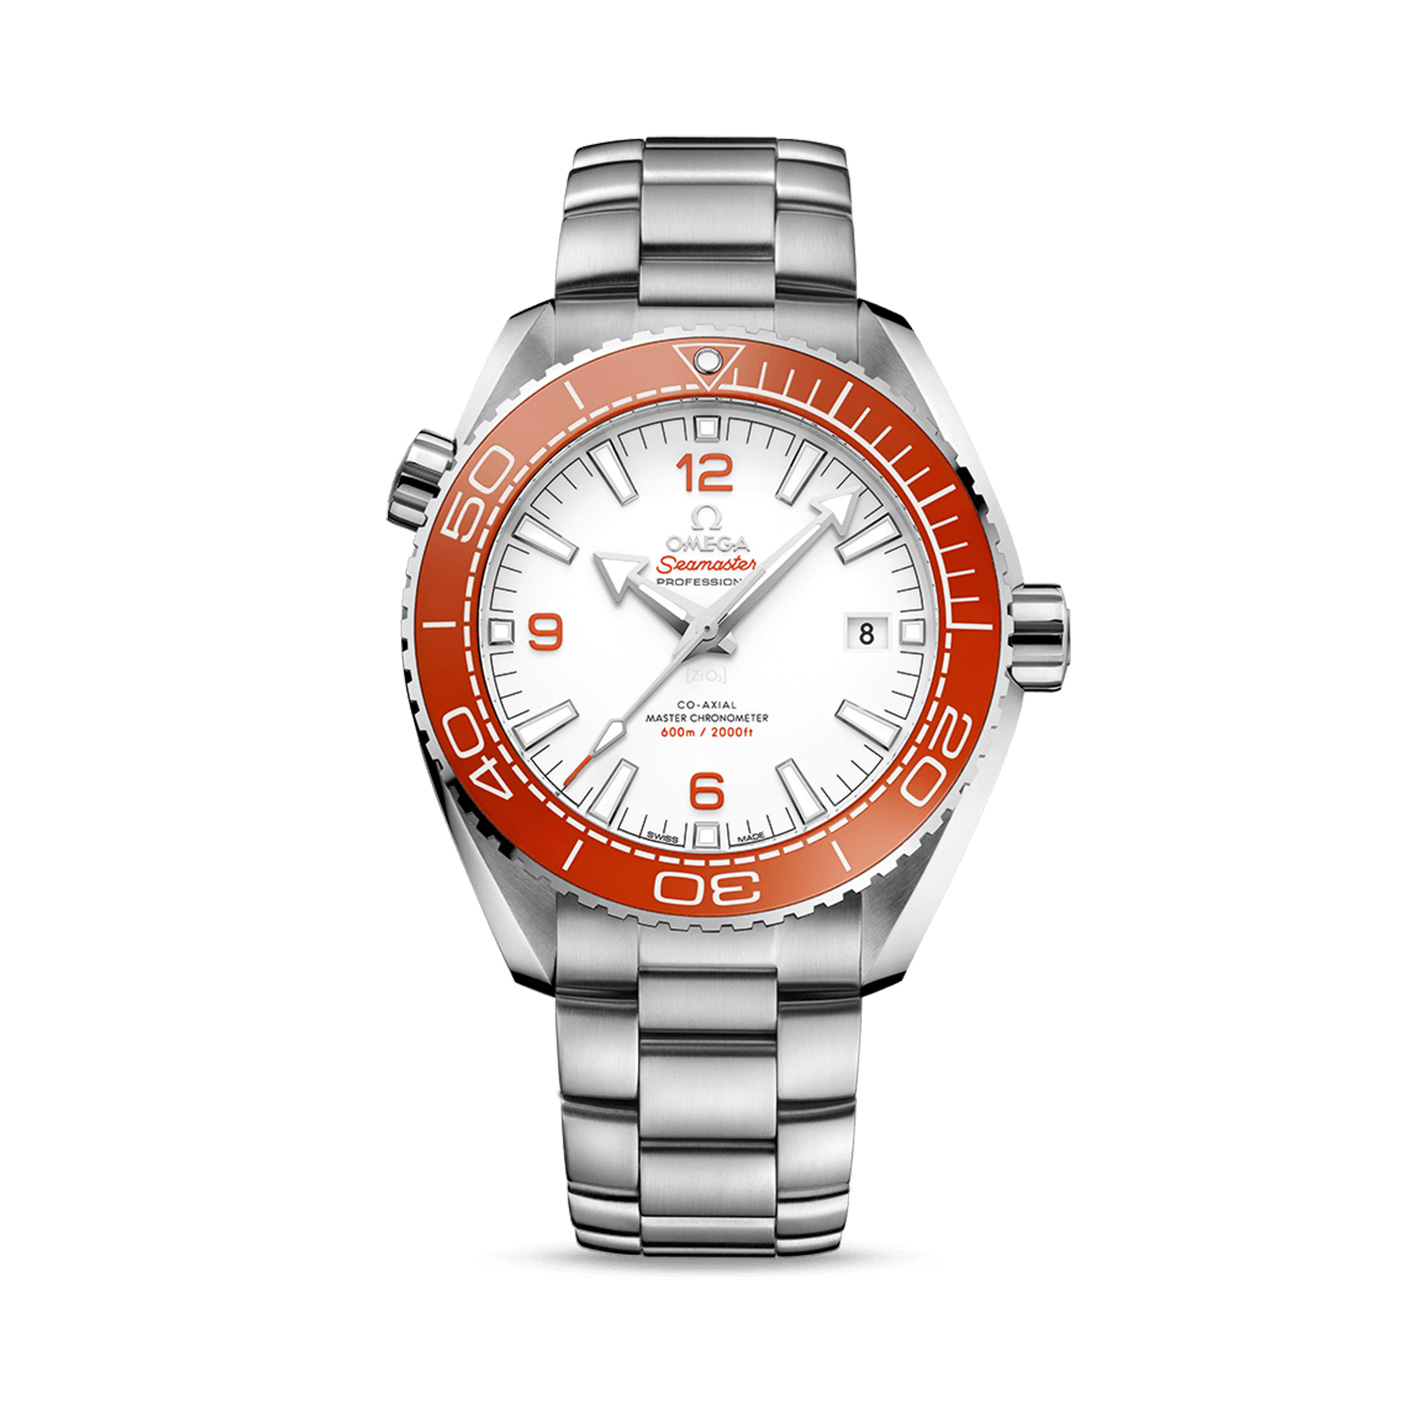 Planet Ocean 600m Co-Axial Master Chronometer 43.5mm Automatic Stainless Steel